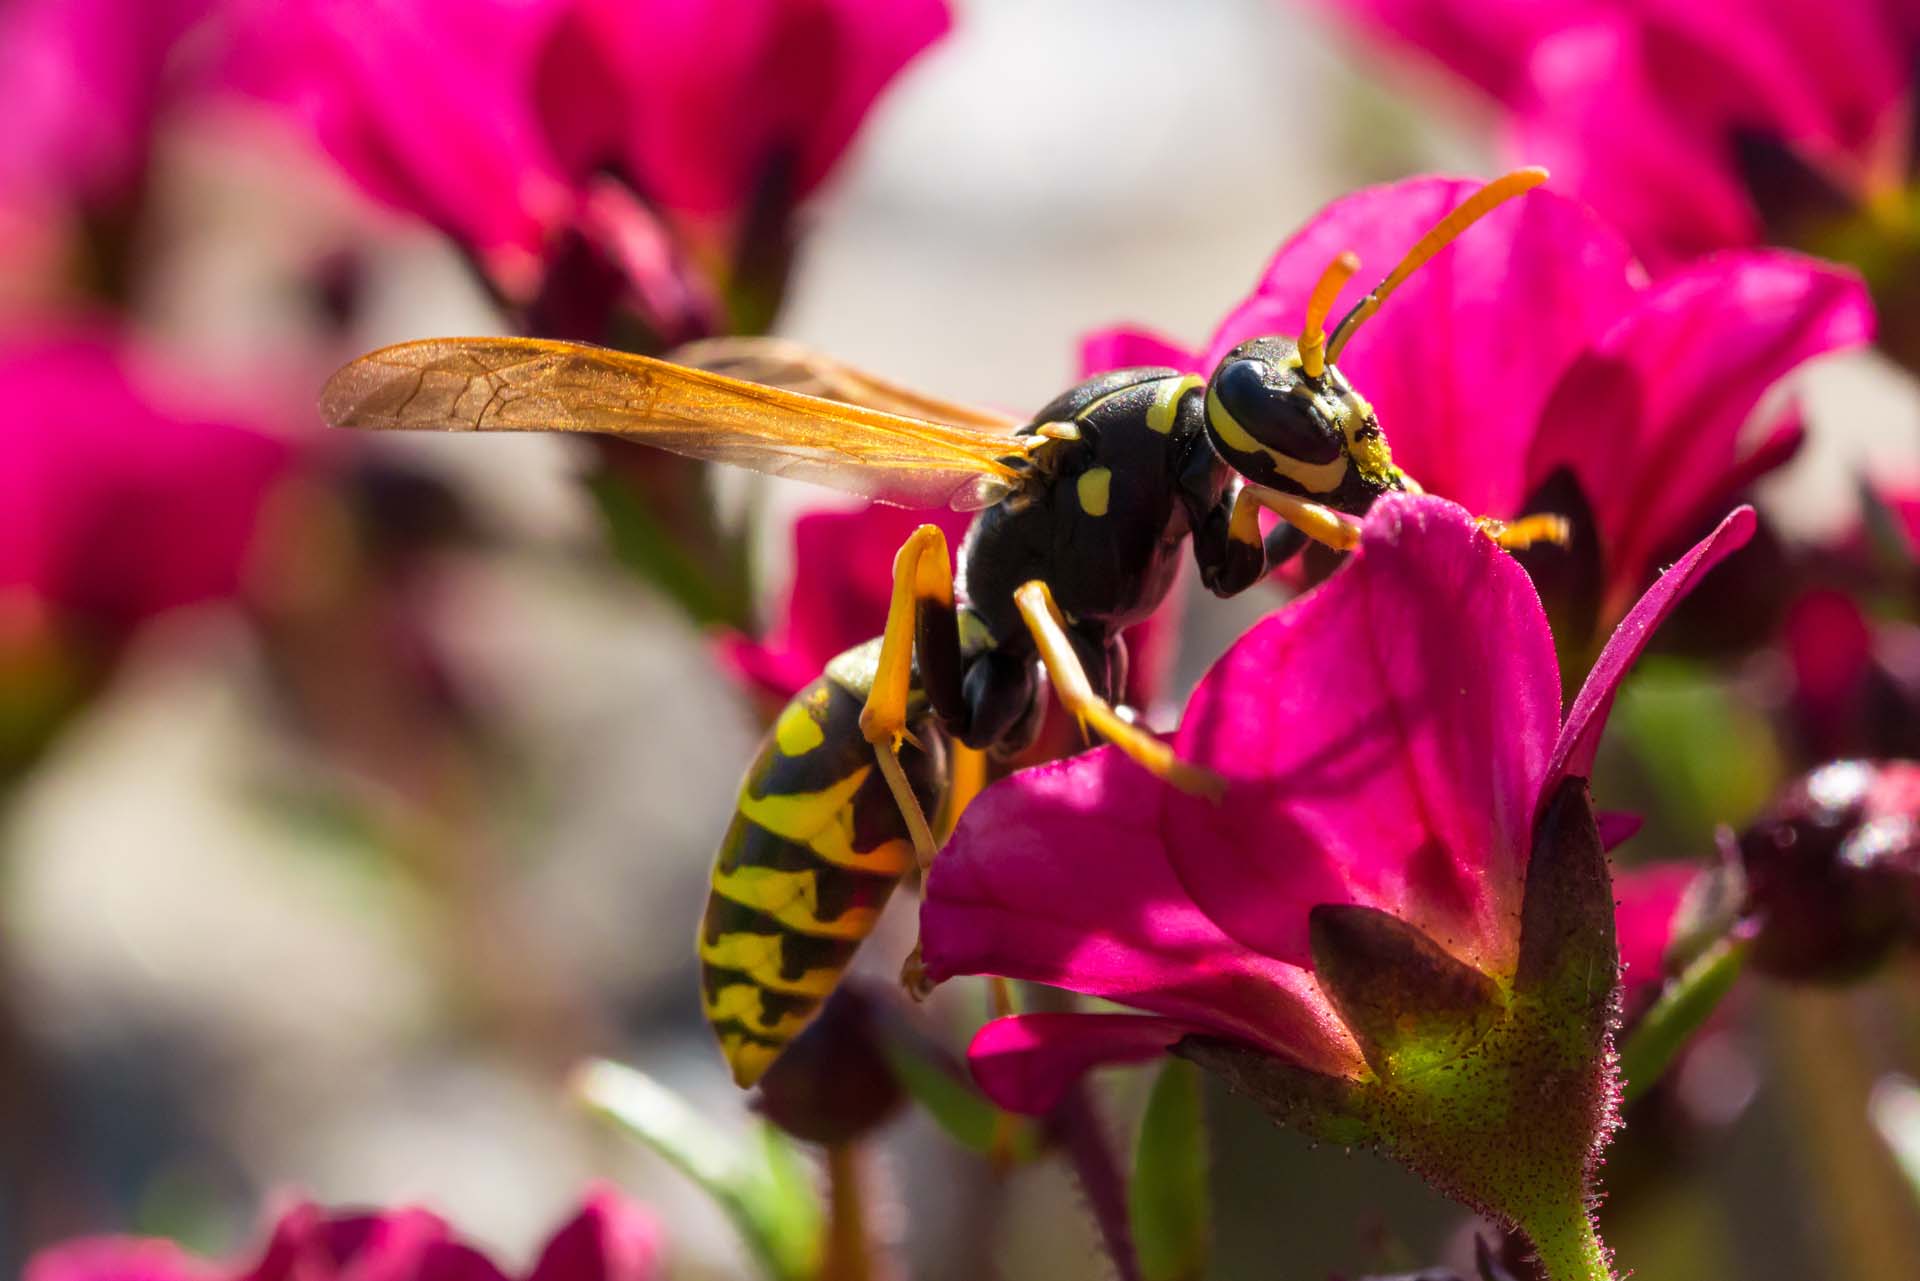 A wasp sitting on a brightly coloured flower